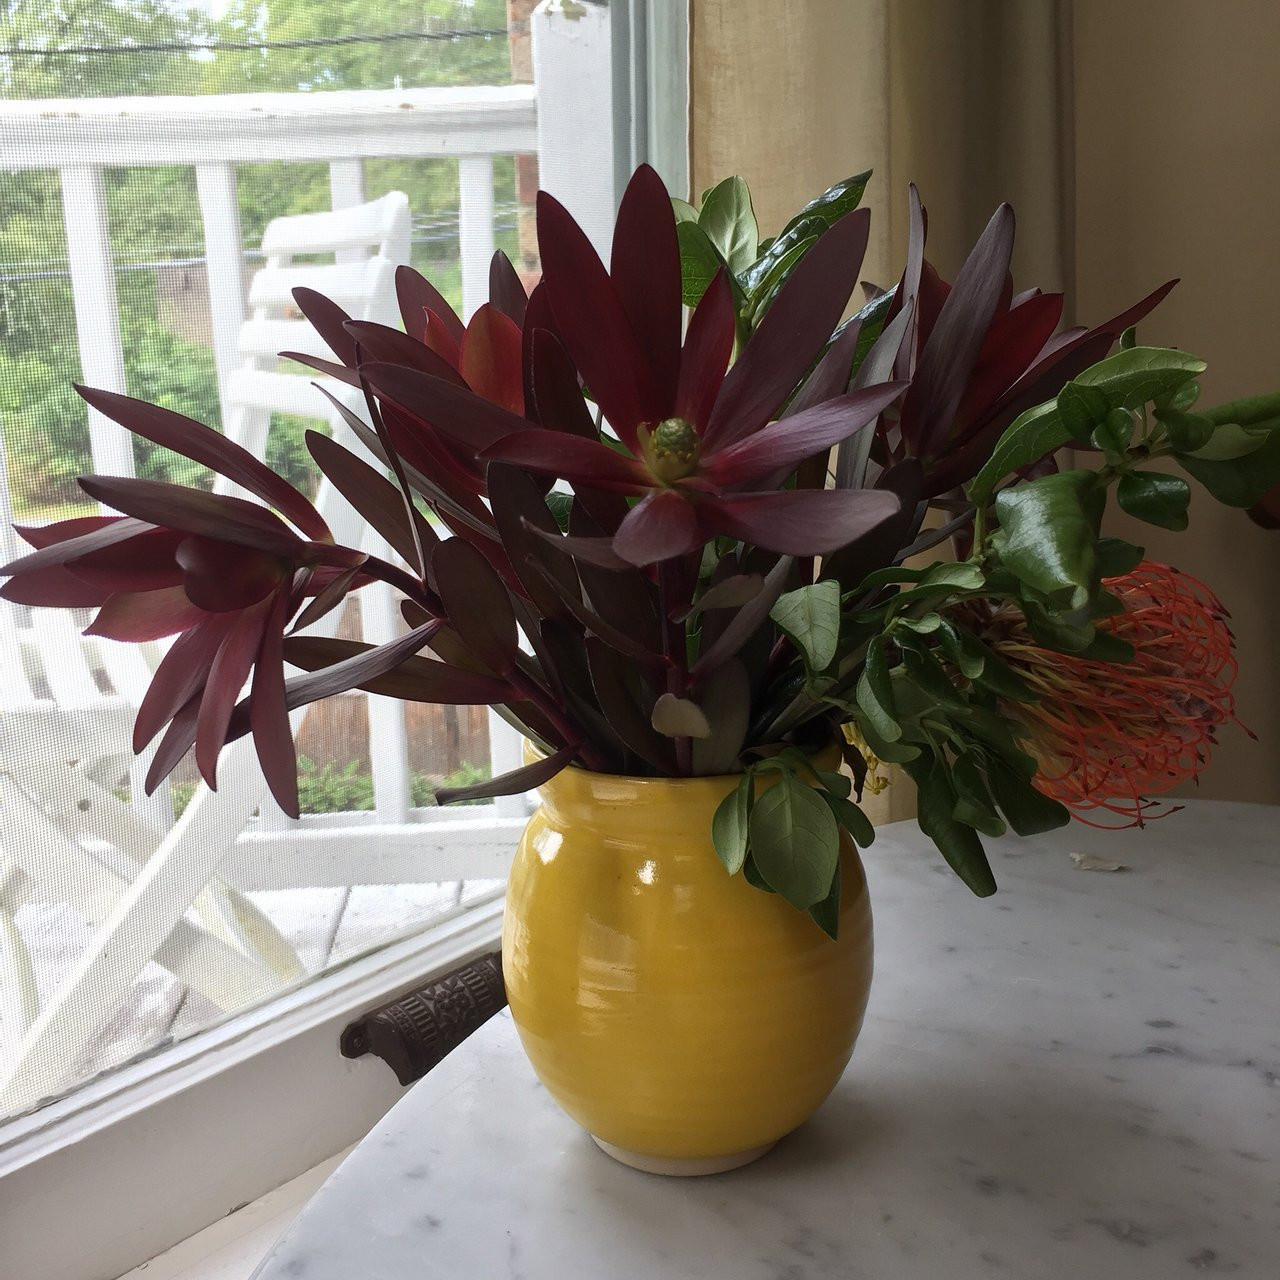 vintage head vases prices of blue barn bnb updated 2018 prices bb reviews millbrook ny intended for blue barn bnb updated 2018 prices bb reviews millbrook ny tripadvisor